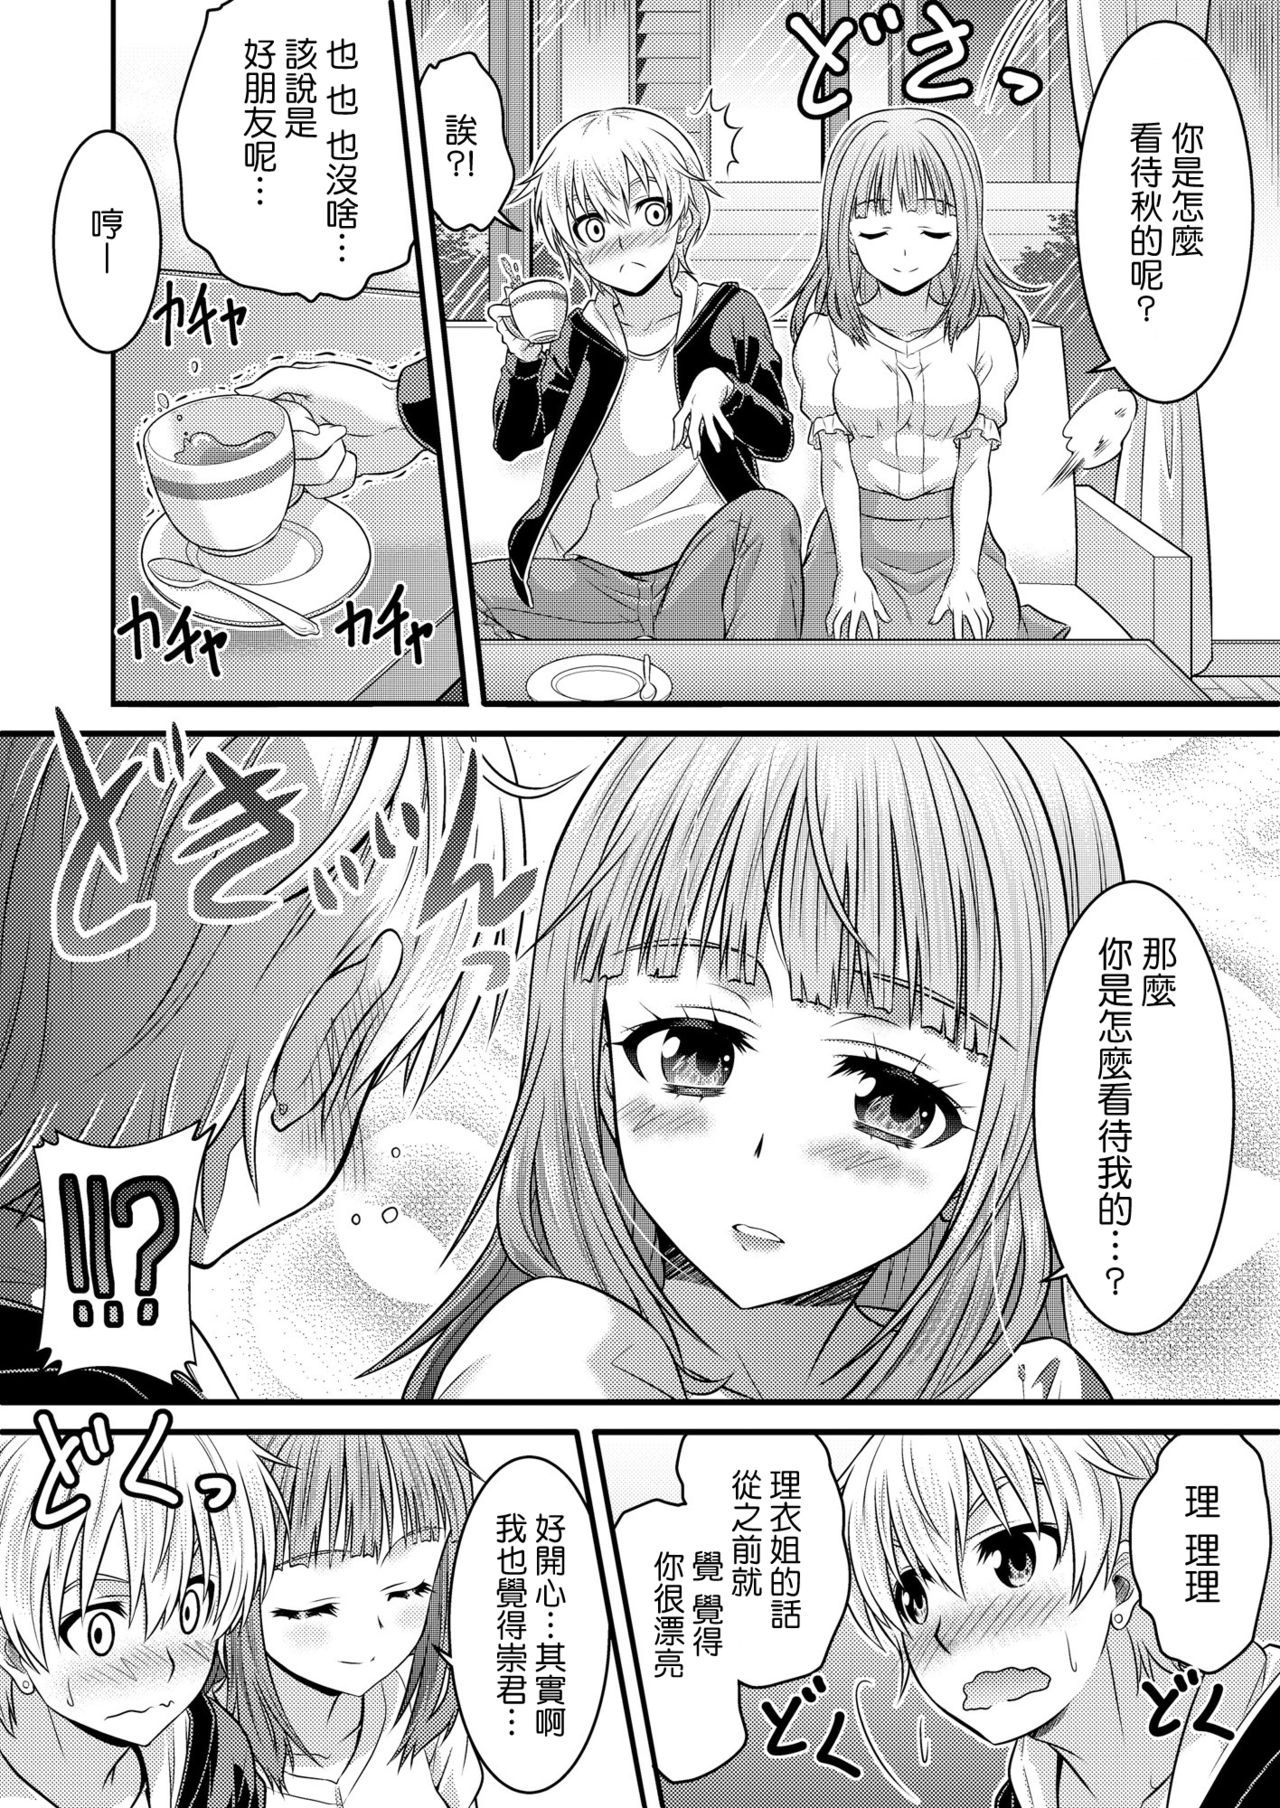 Metamorph ★ Coordination - I Become Whatever Girl I Crossdress As~ [Sister Arc, Classmate Arc] [Chinese] [瑞树汉化组] page 11 full